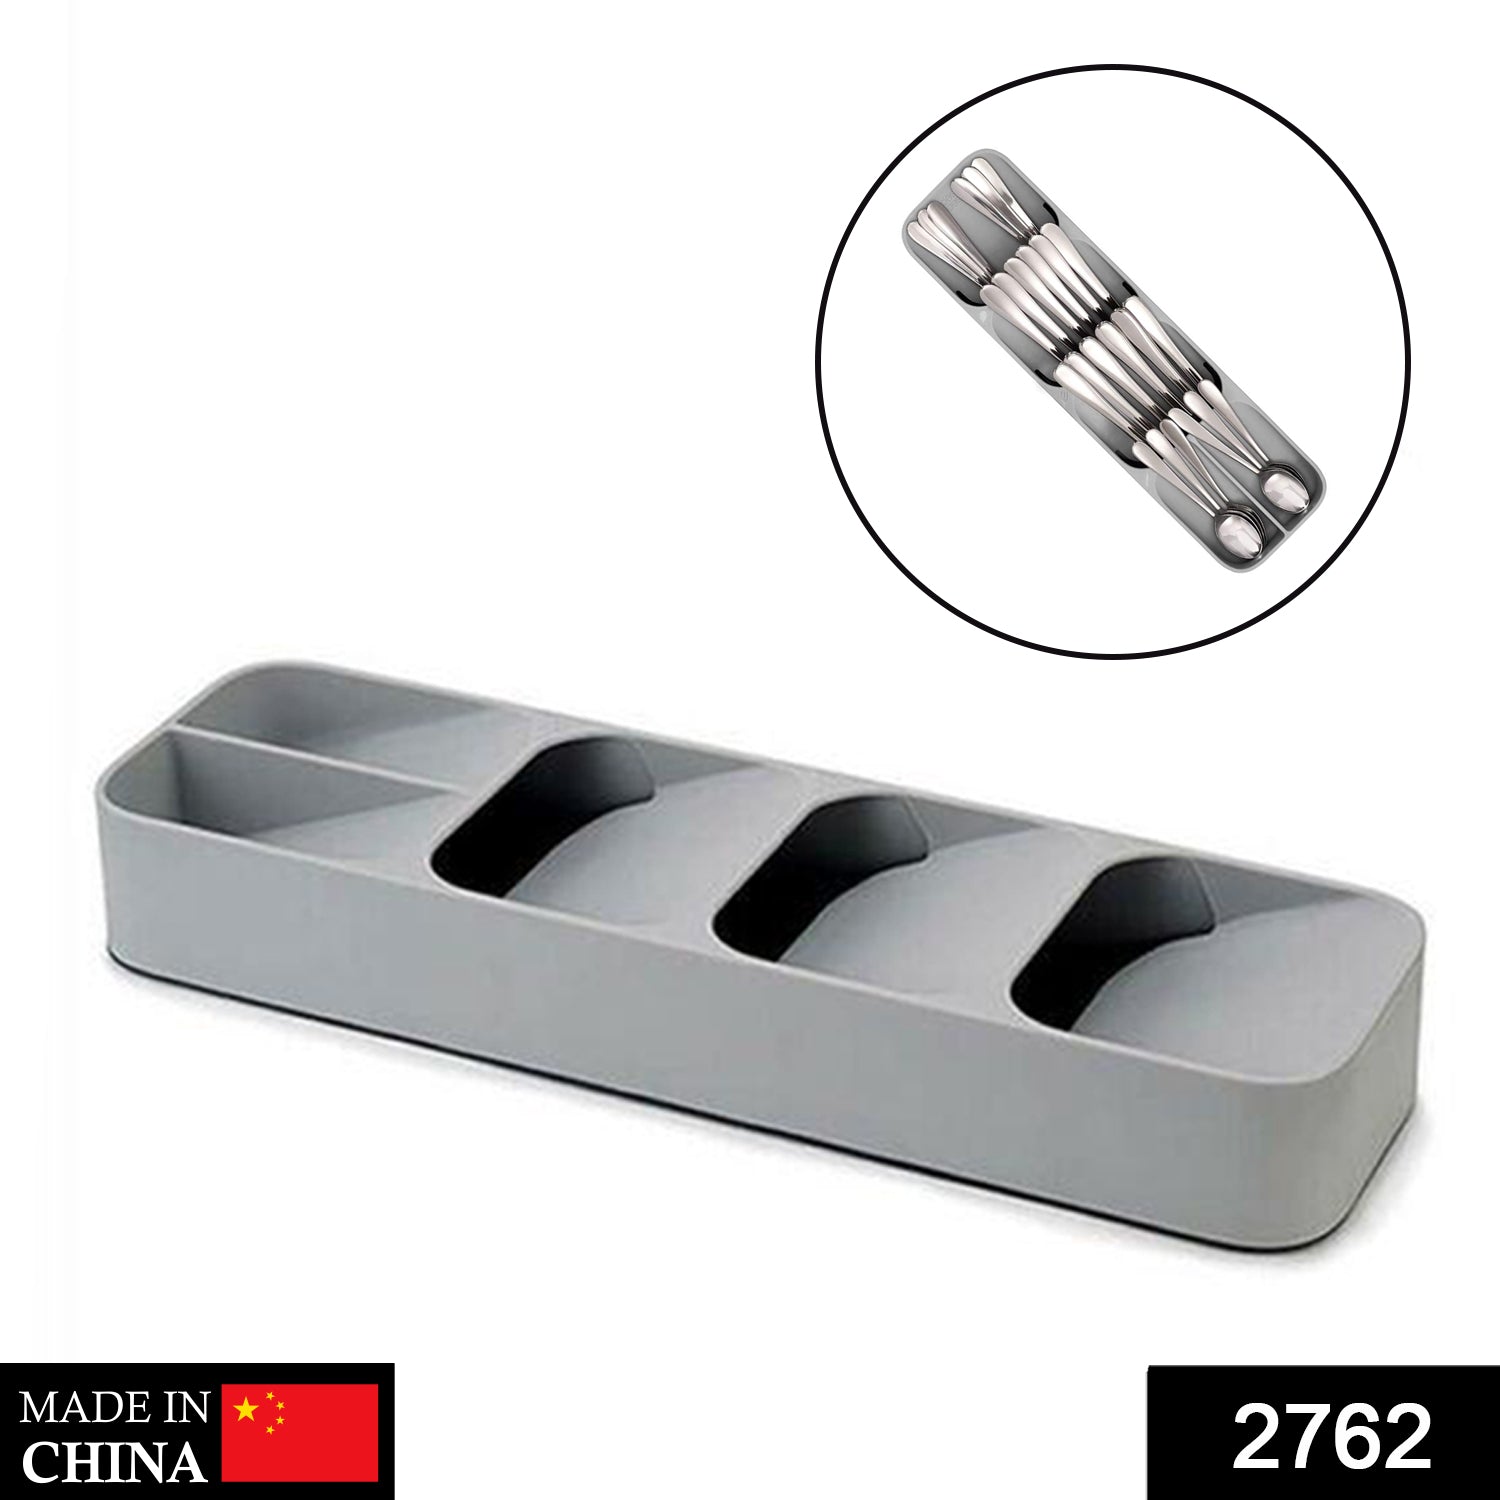 2762 1 Pc Cutlery Tray Box Used For Storing Cutlery Items And Stuffs Easily And Safely.